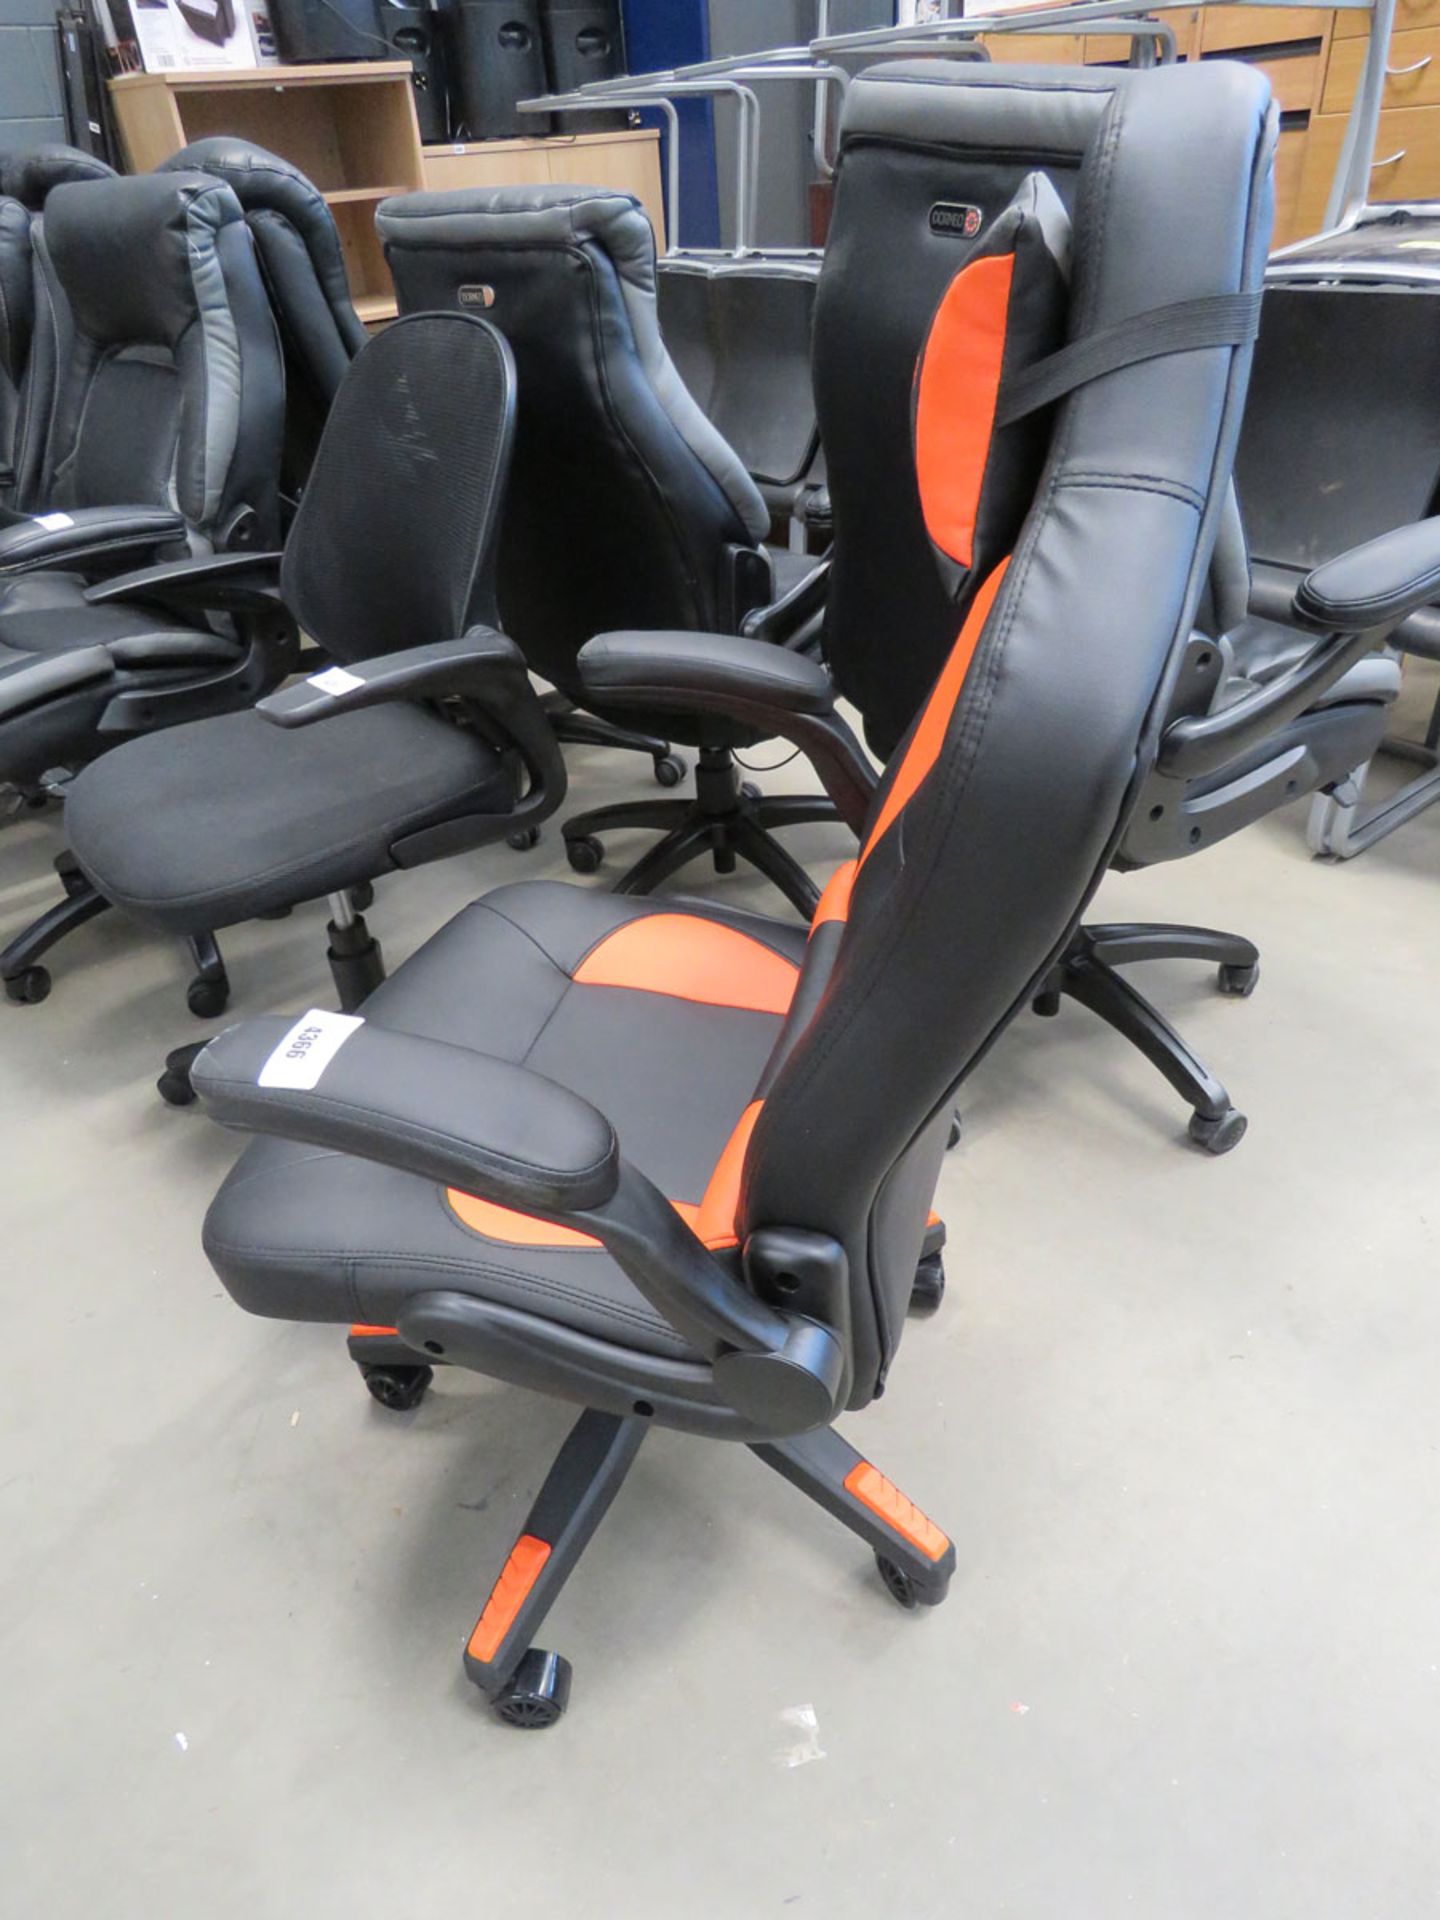 Canyon orange and black gaming chair - Image 2 of 2